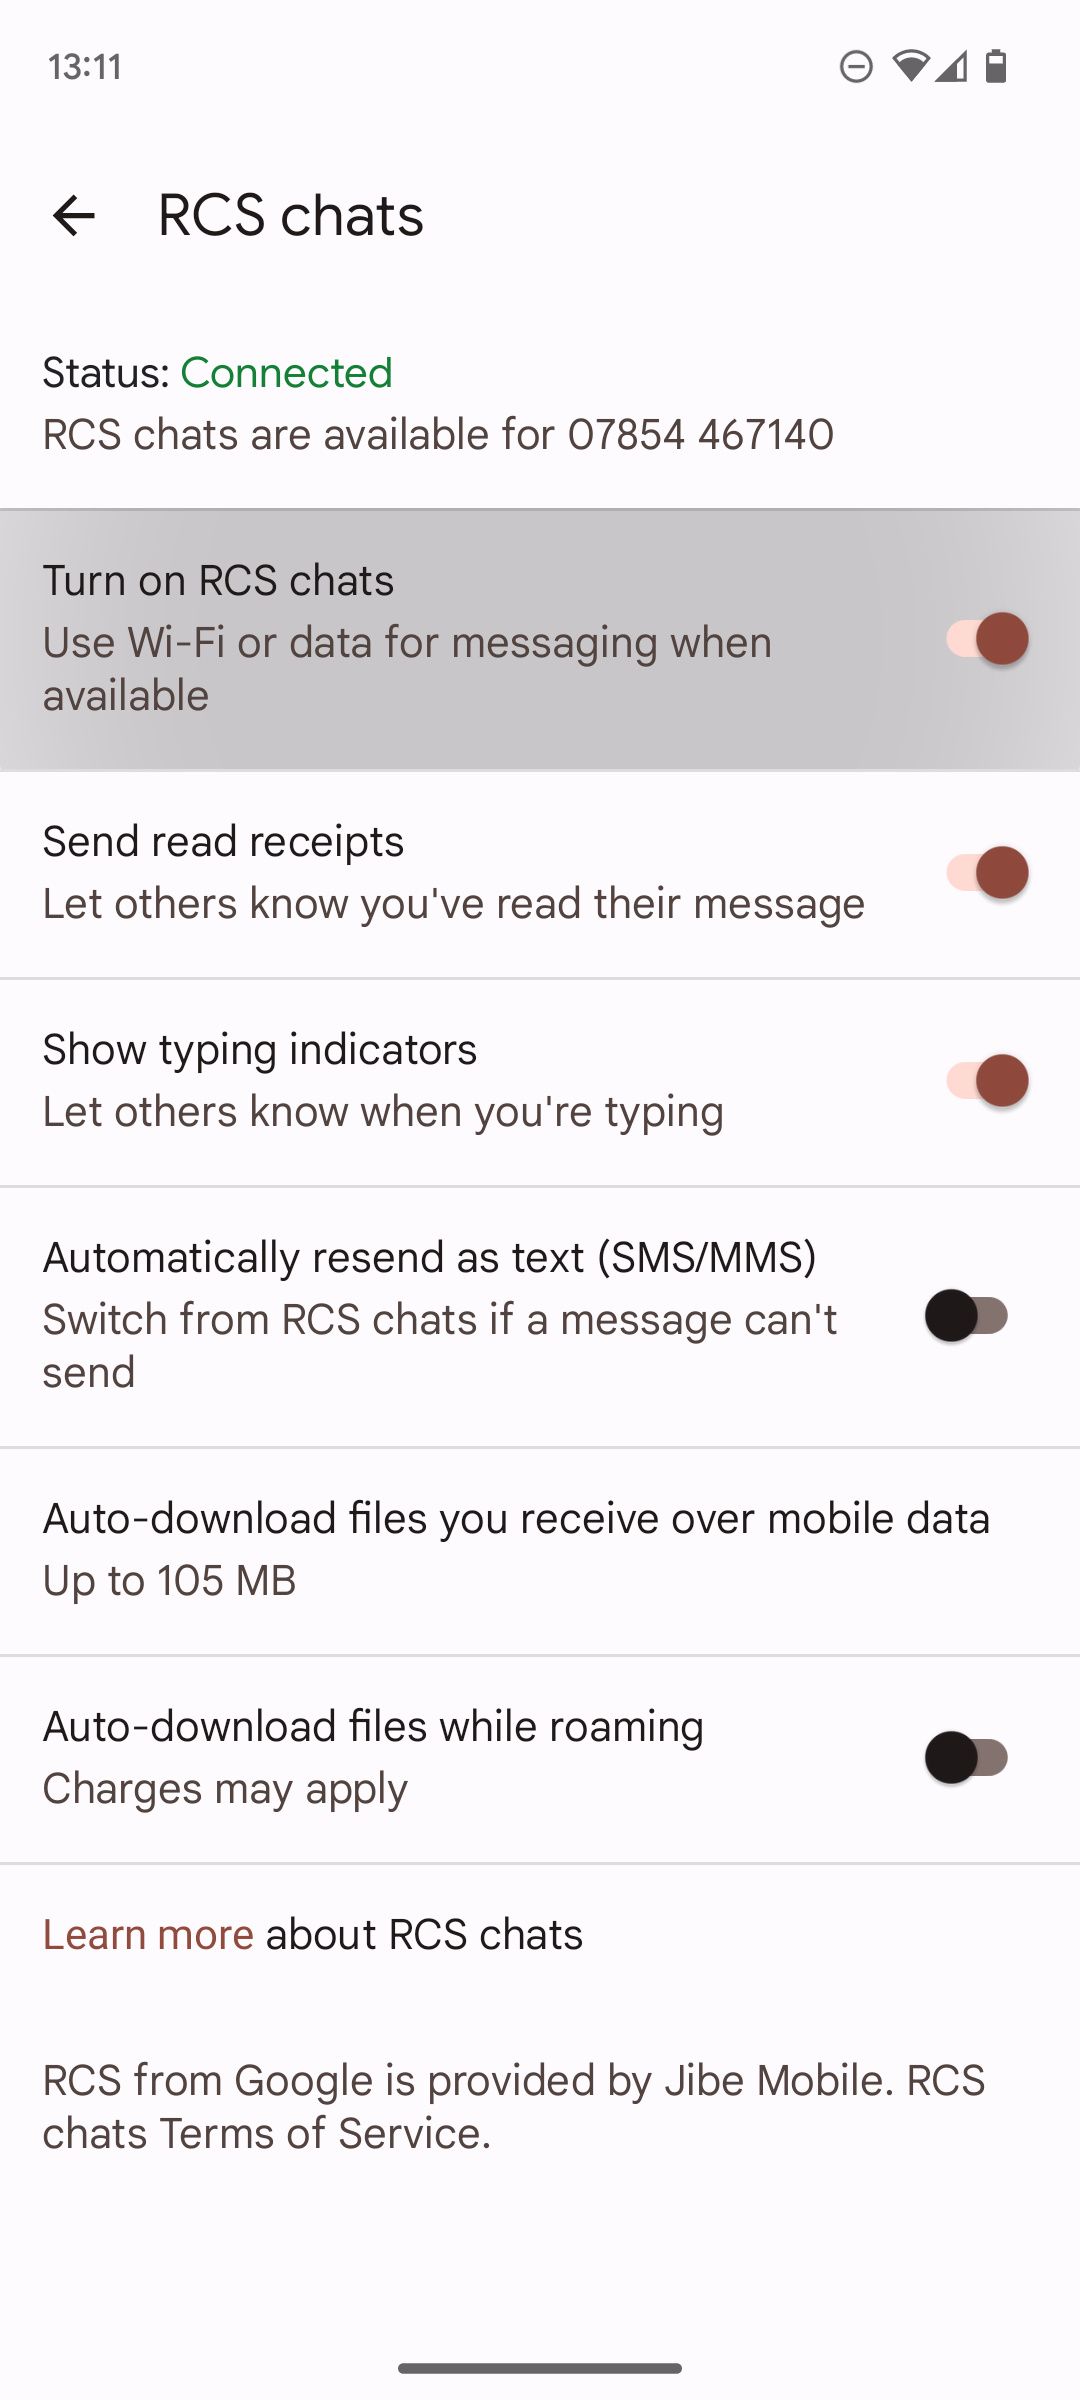 3. Turn on RCS chats option in RCS settings in Android